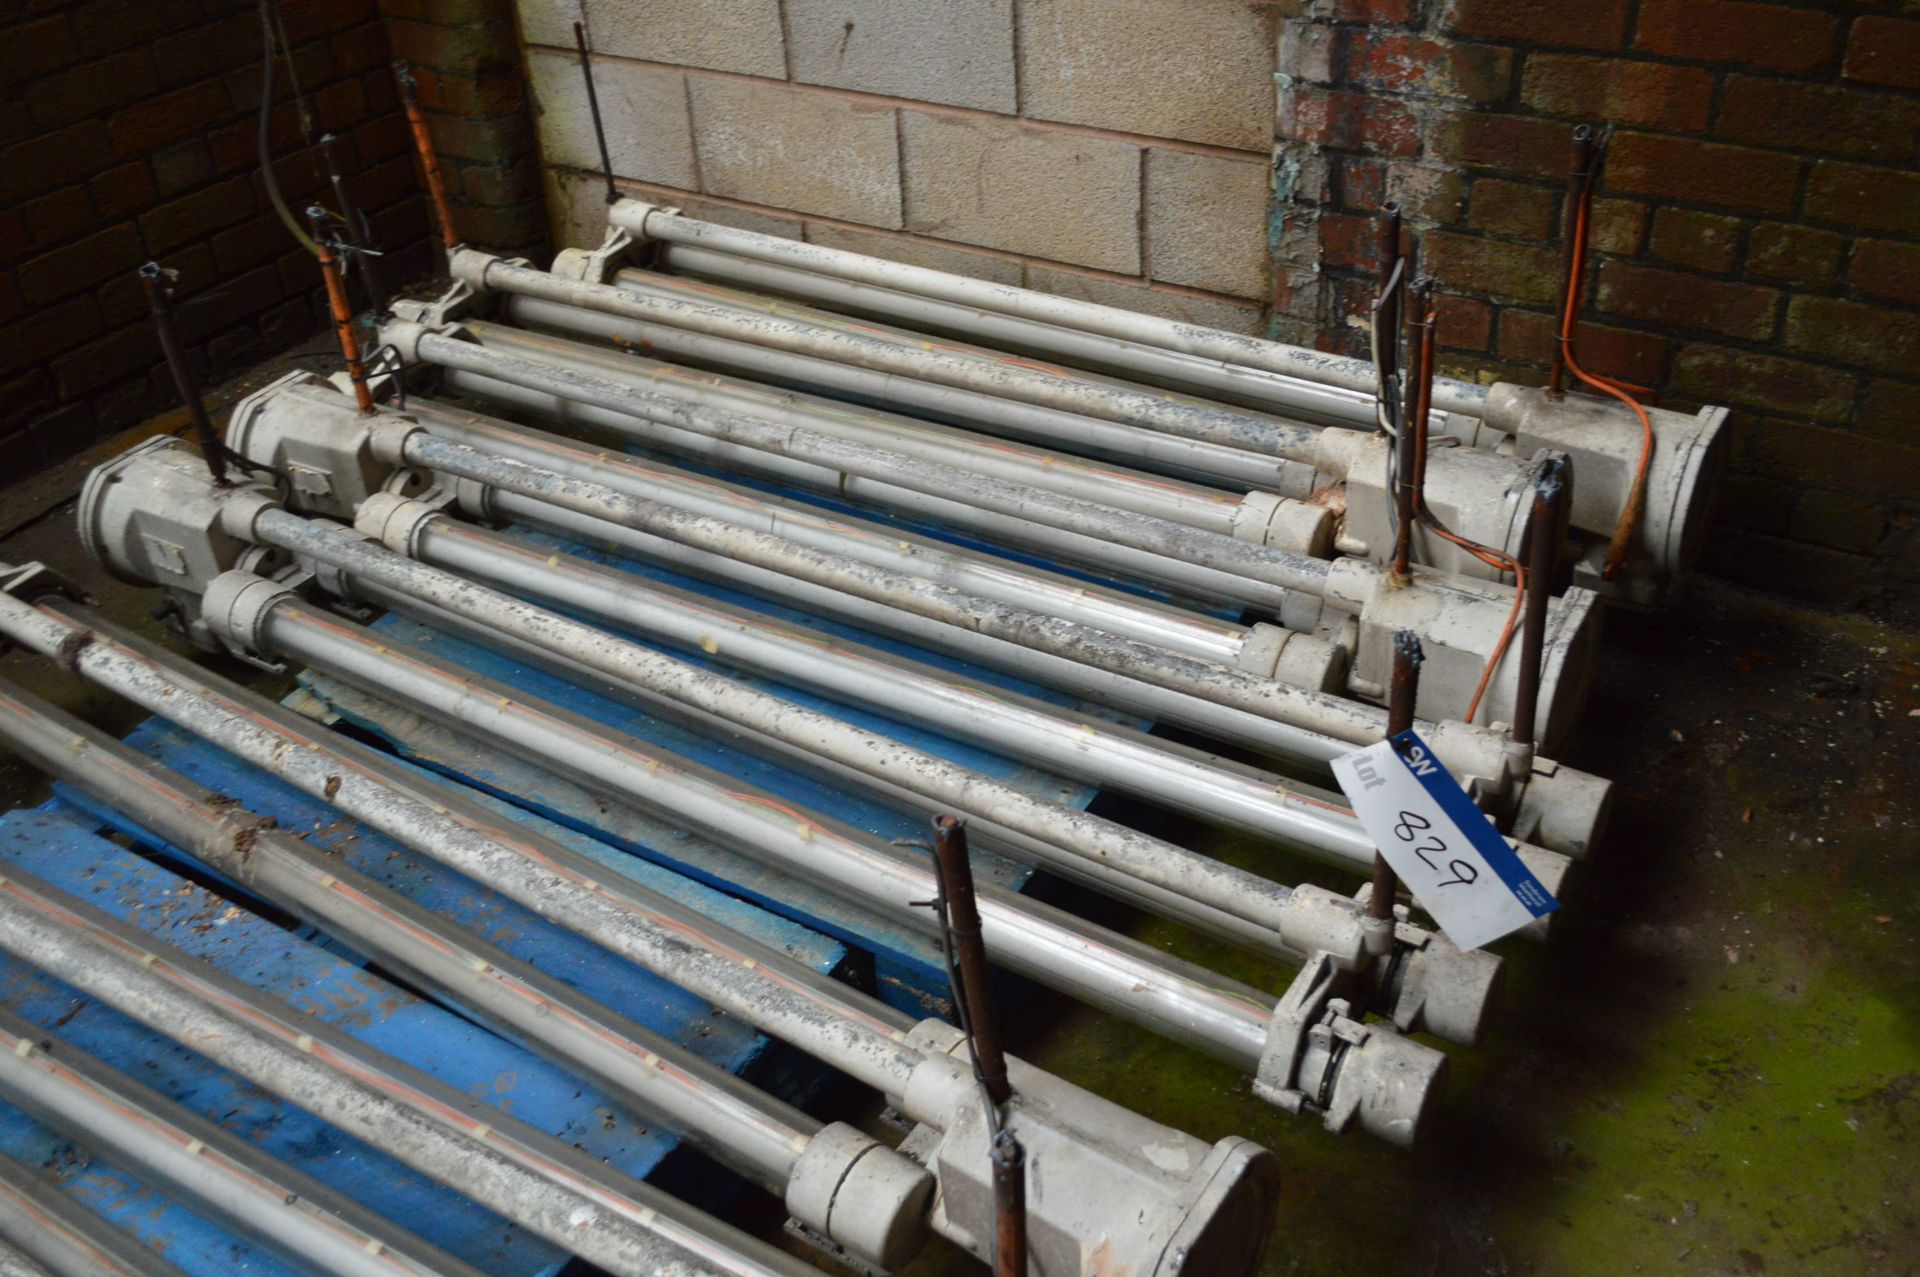 Five Twin Tube Flame Proof Fluorescent Light Fittings, each approx. 1.4m long